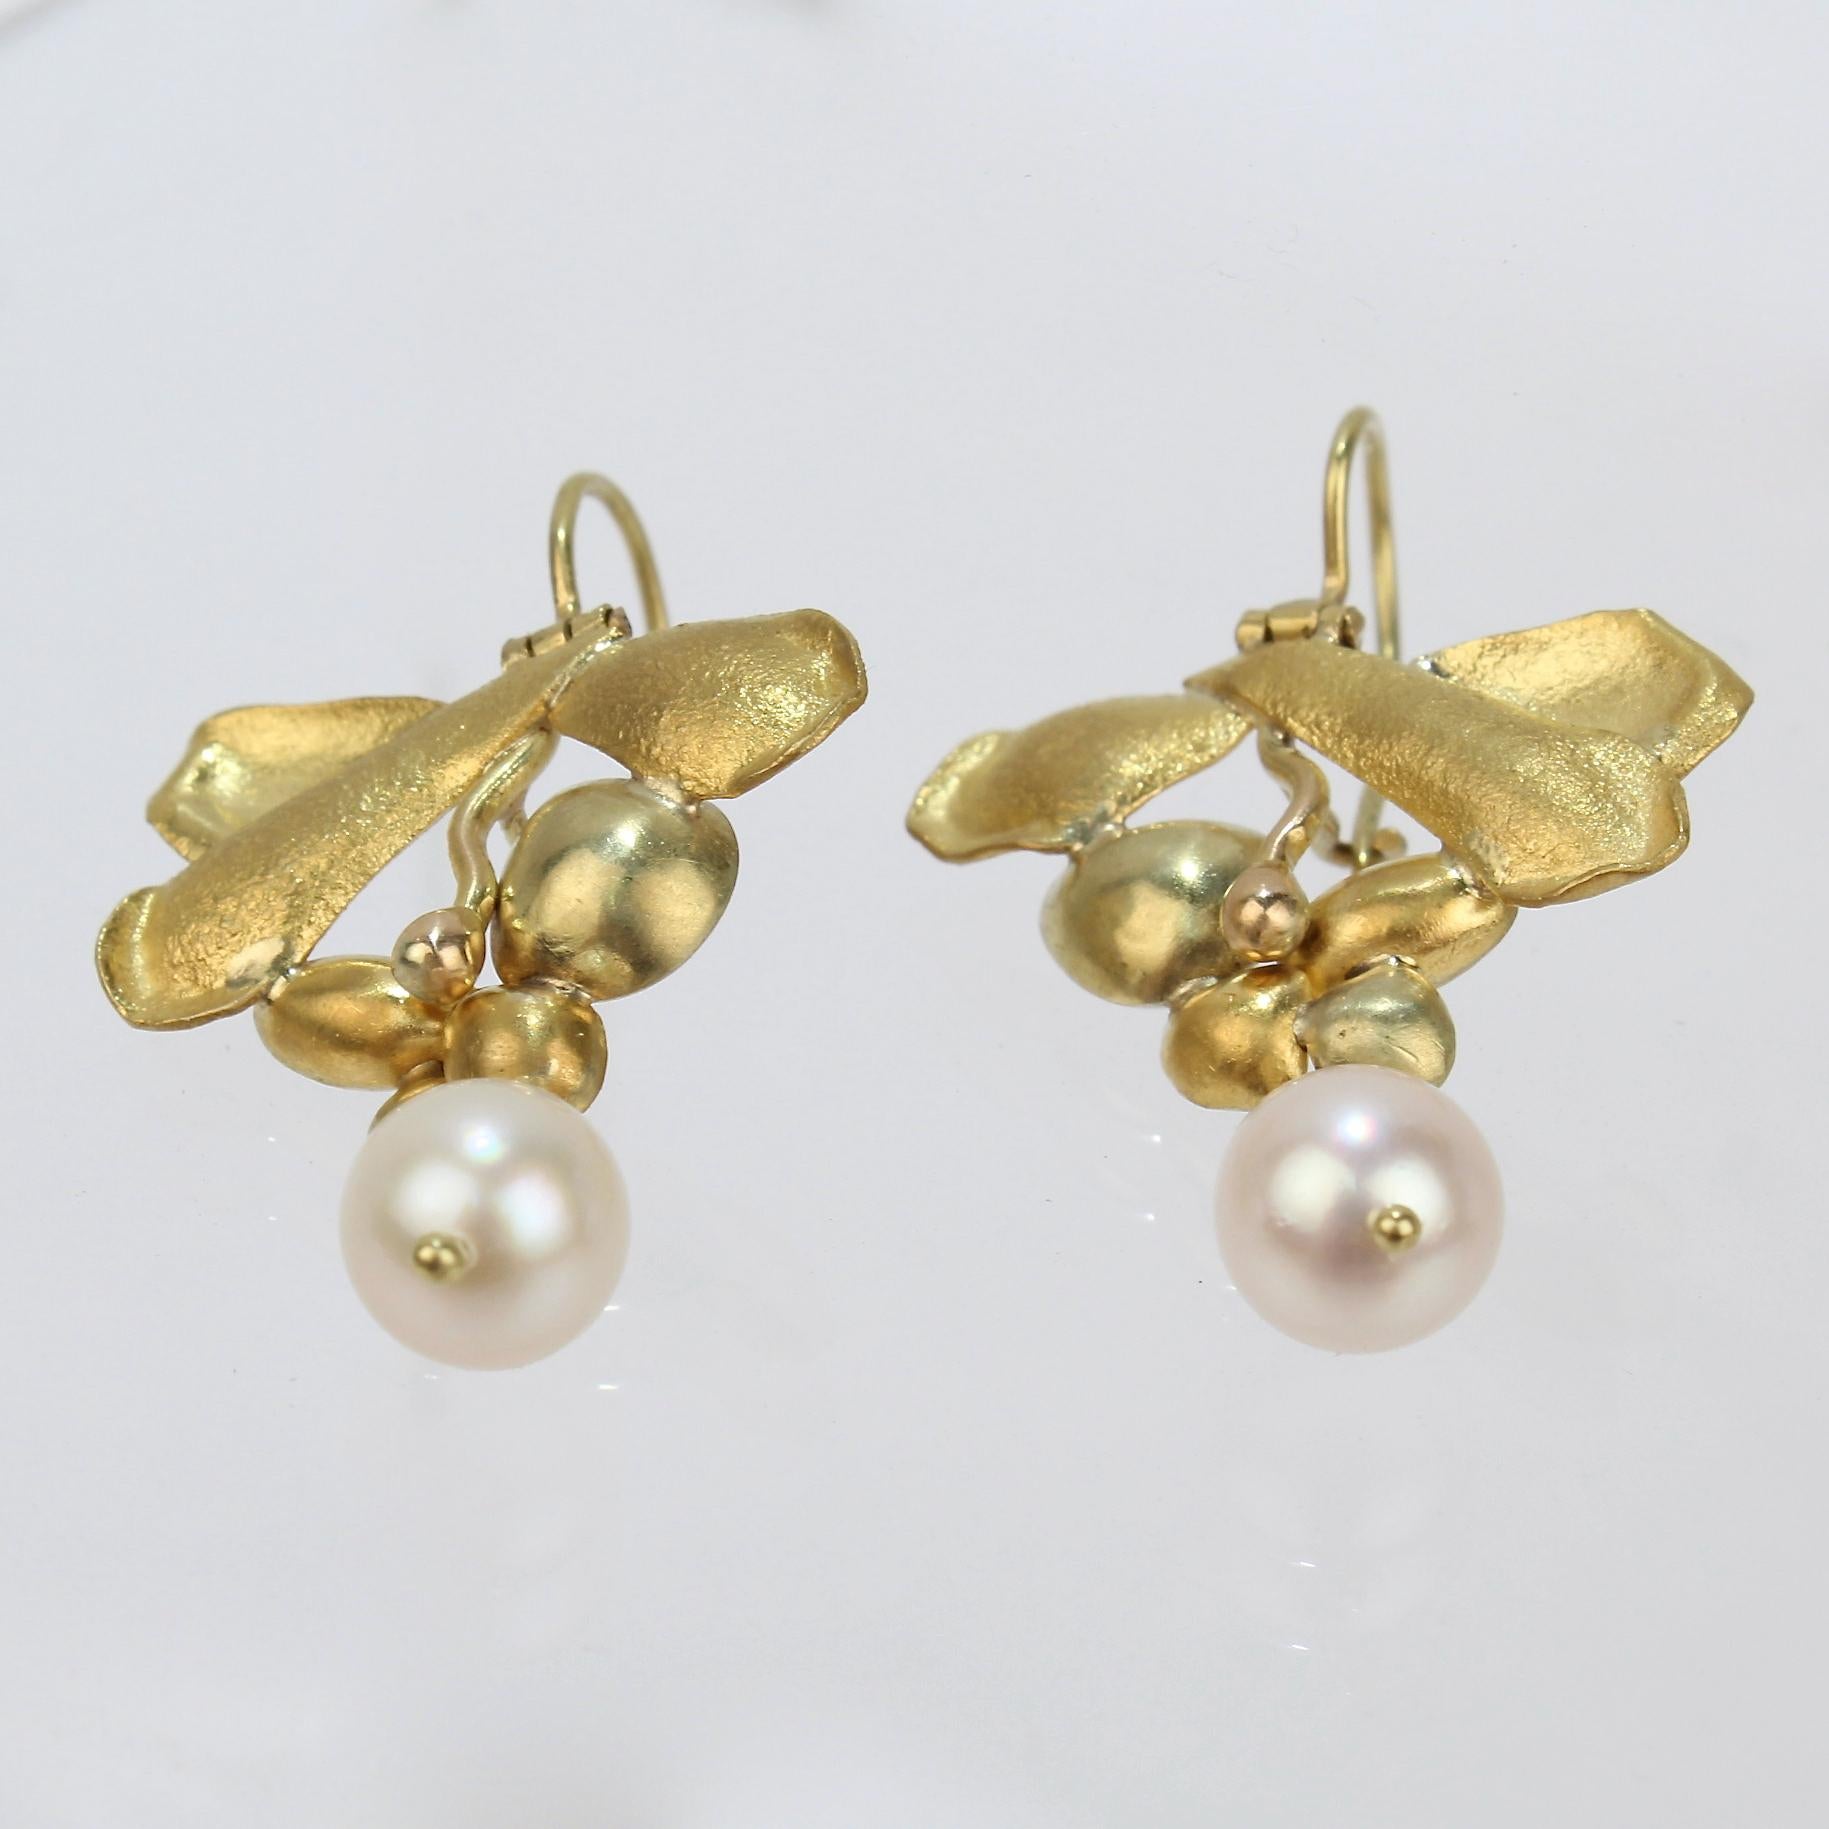 Uncut Pearl and High Karat Yellow and Green Gold Modernist Earrings